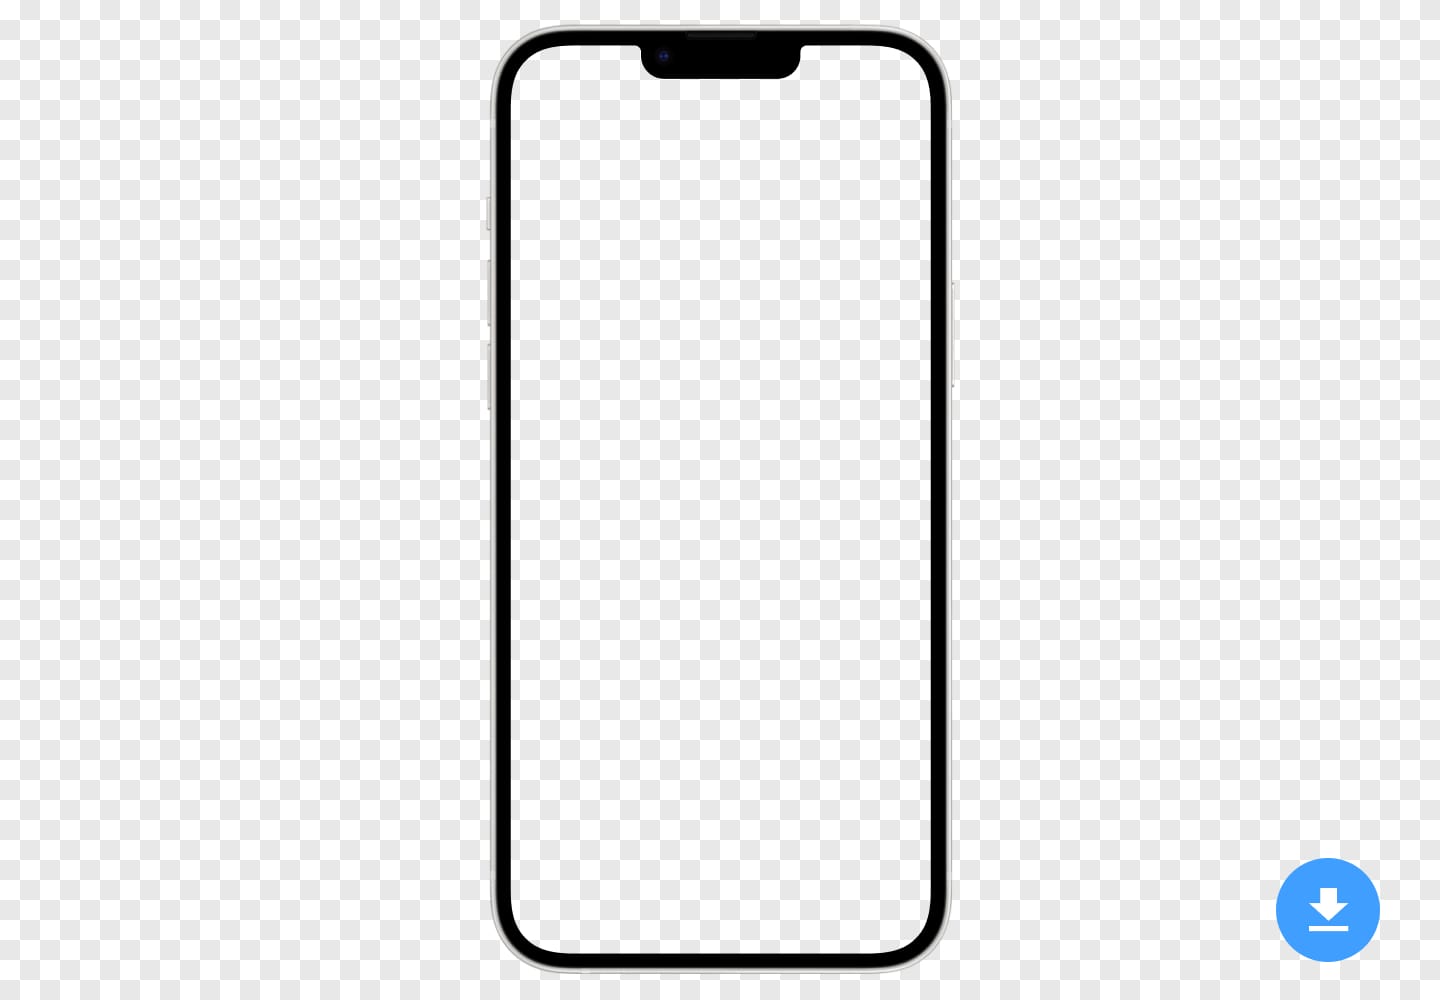 Free HD mockup of Apple iPhone 14 Plus (2022) in PNG and PSD image format with transparent background